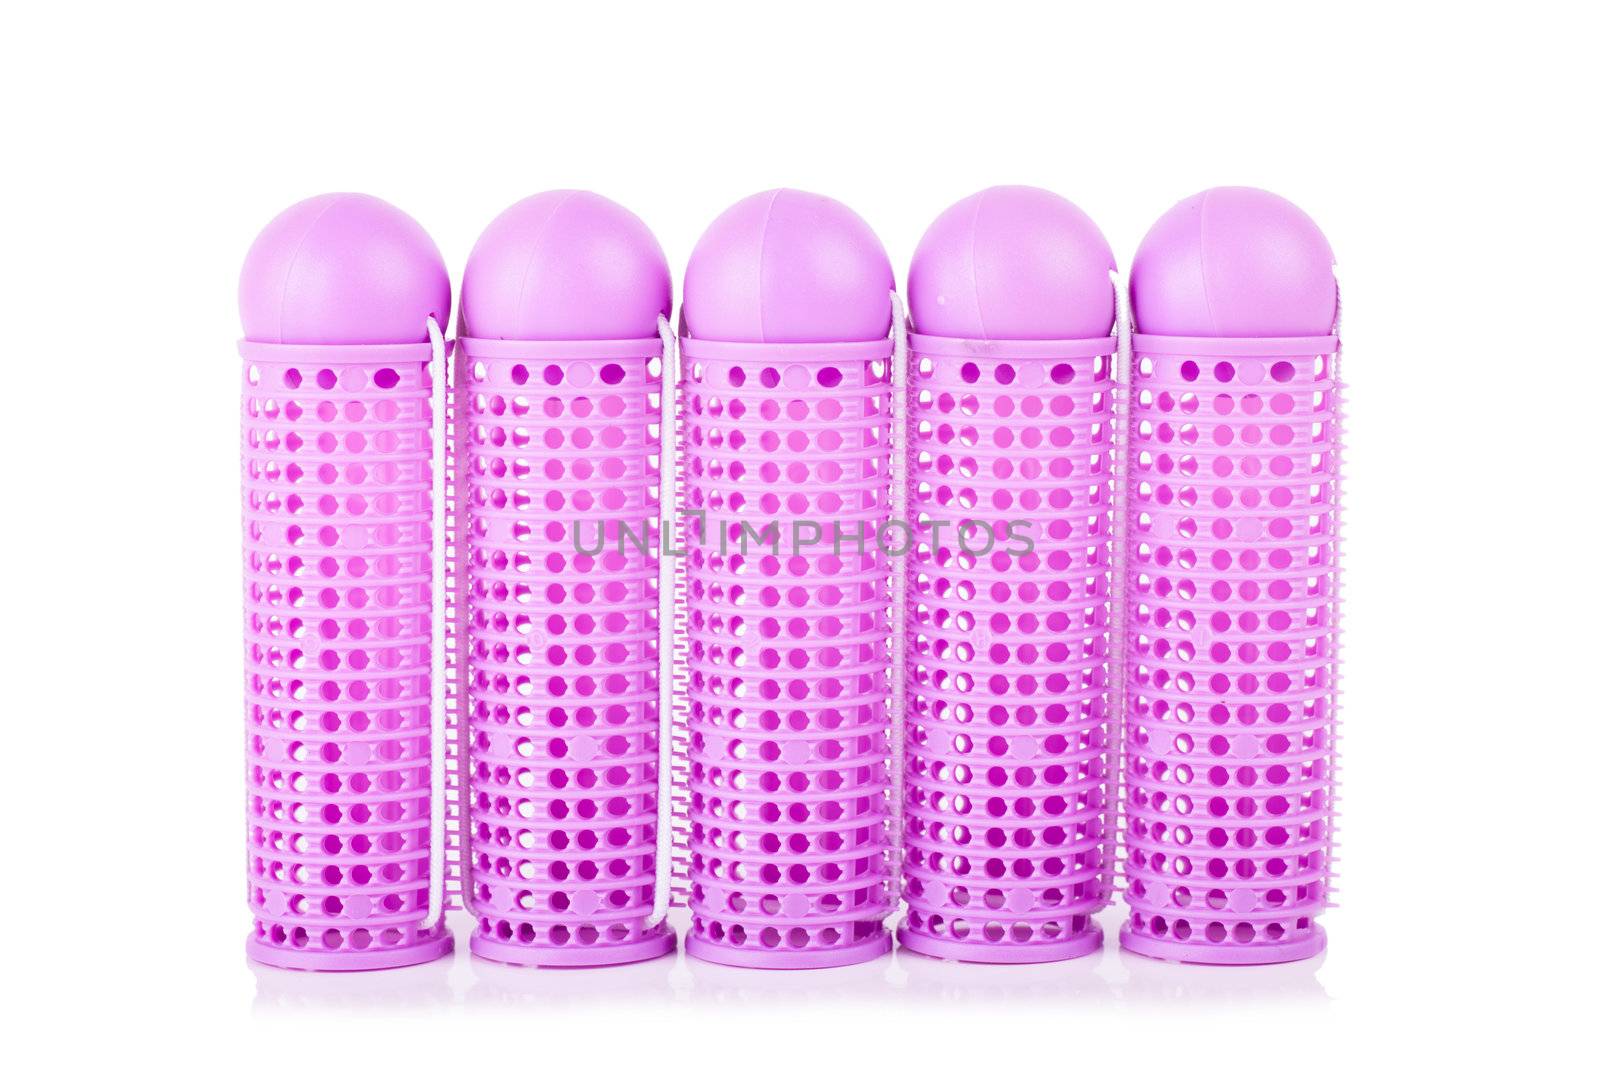 Closeup view of pink hair curlers over white background